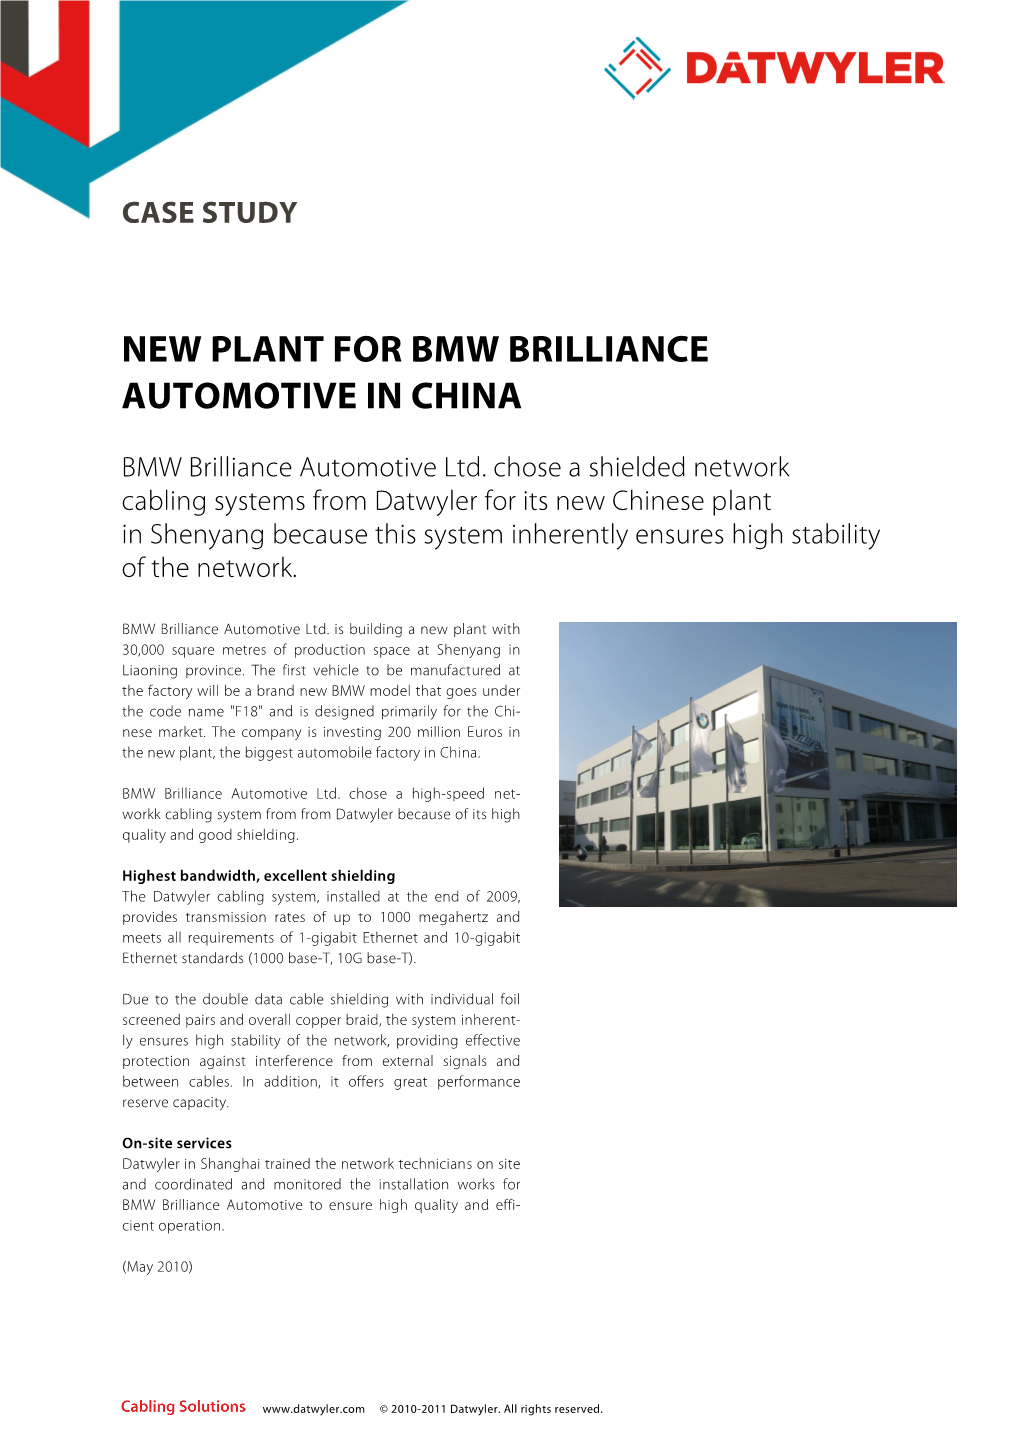 Case Study New Plant for Bmw Brilliance Automotive in China